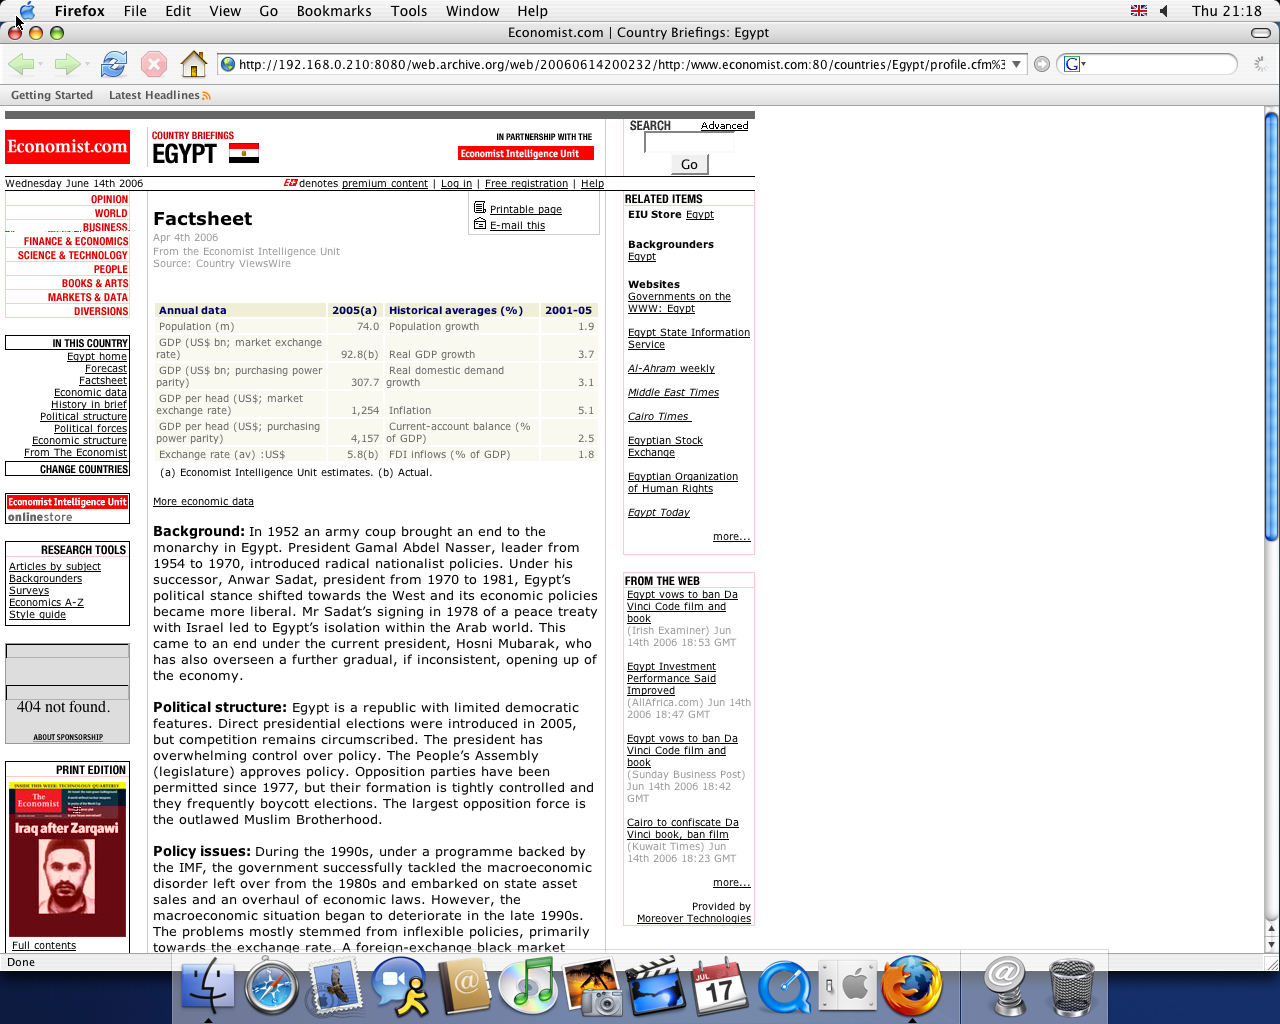 OS X 10.3 PPC with Mozilla Firefox 1.0 displaying a page from The Economist archived at June 14, 2006 at 20:02:32